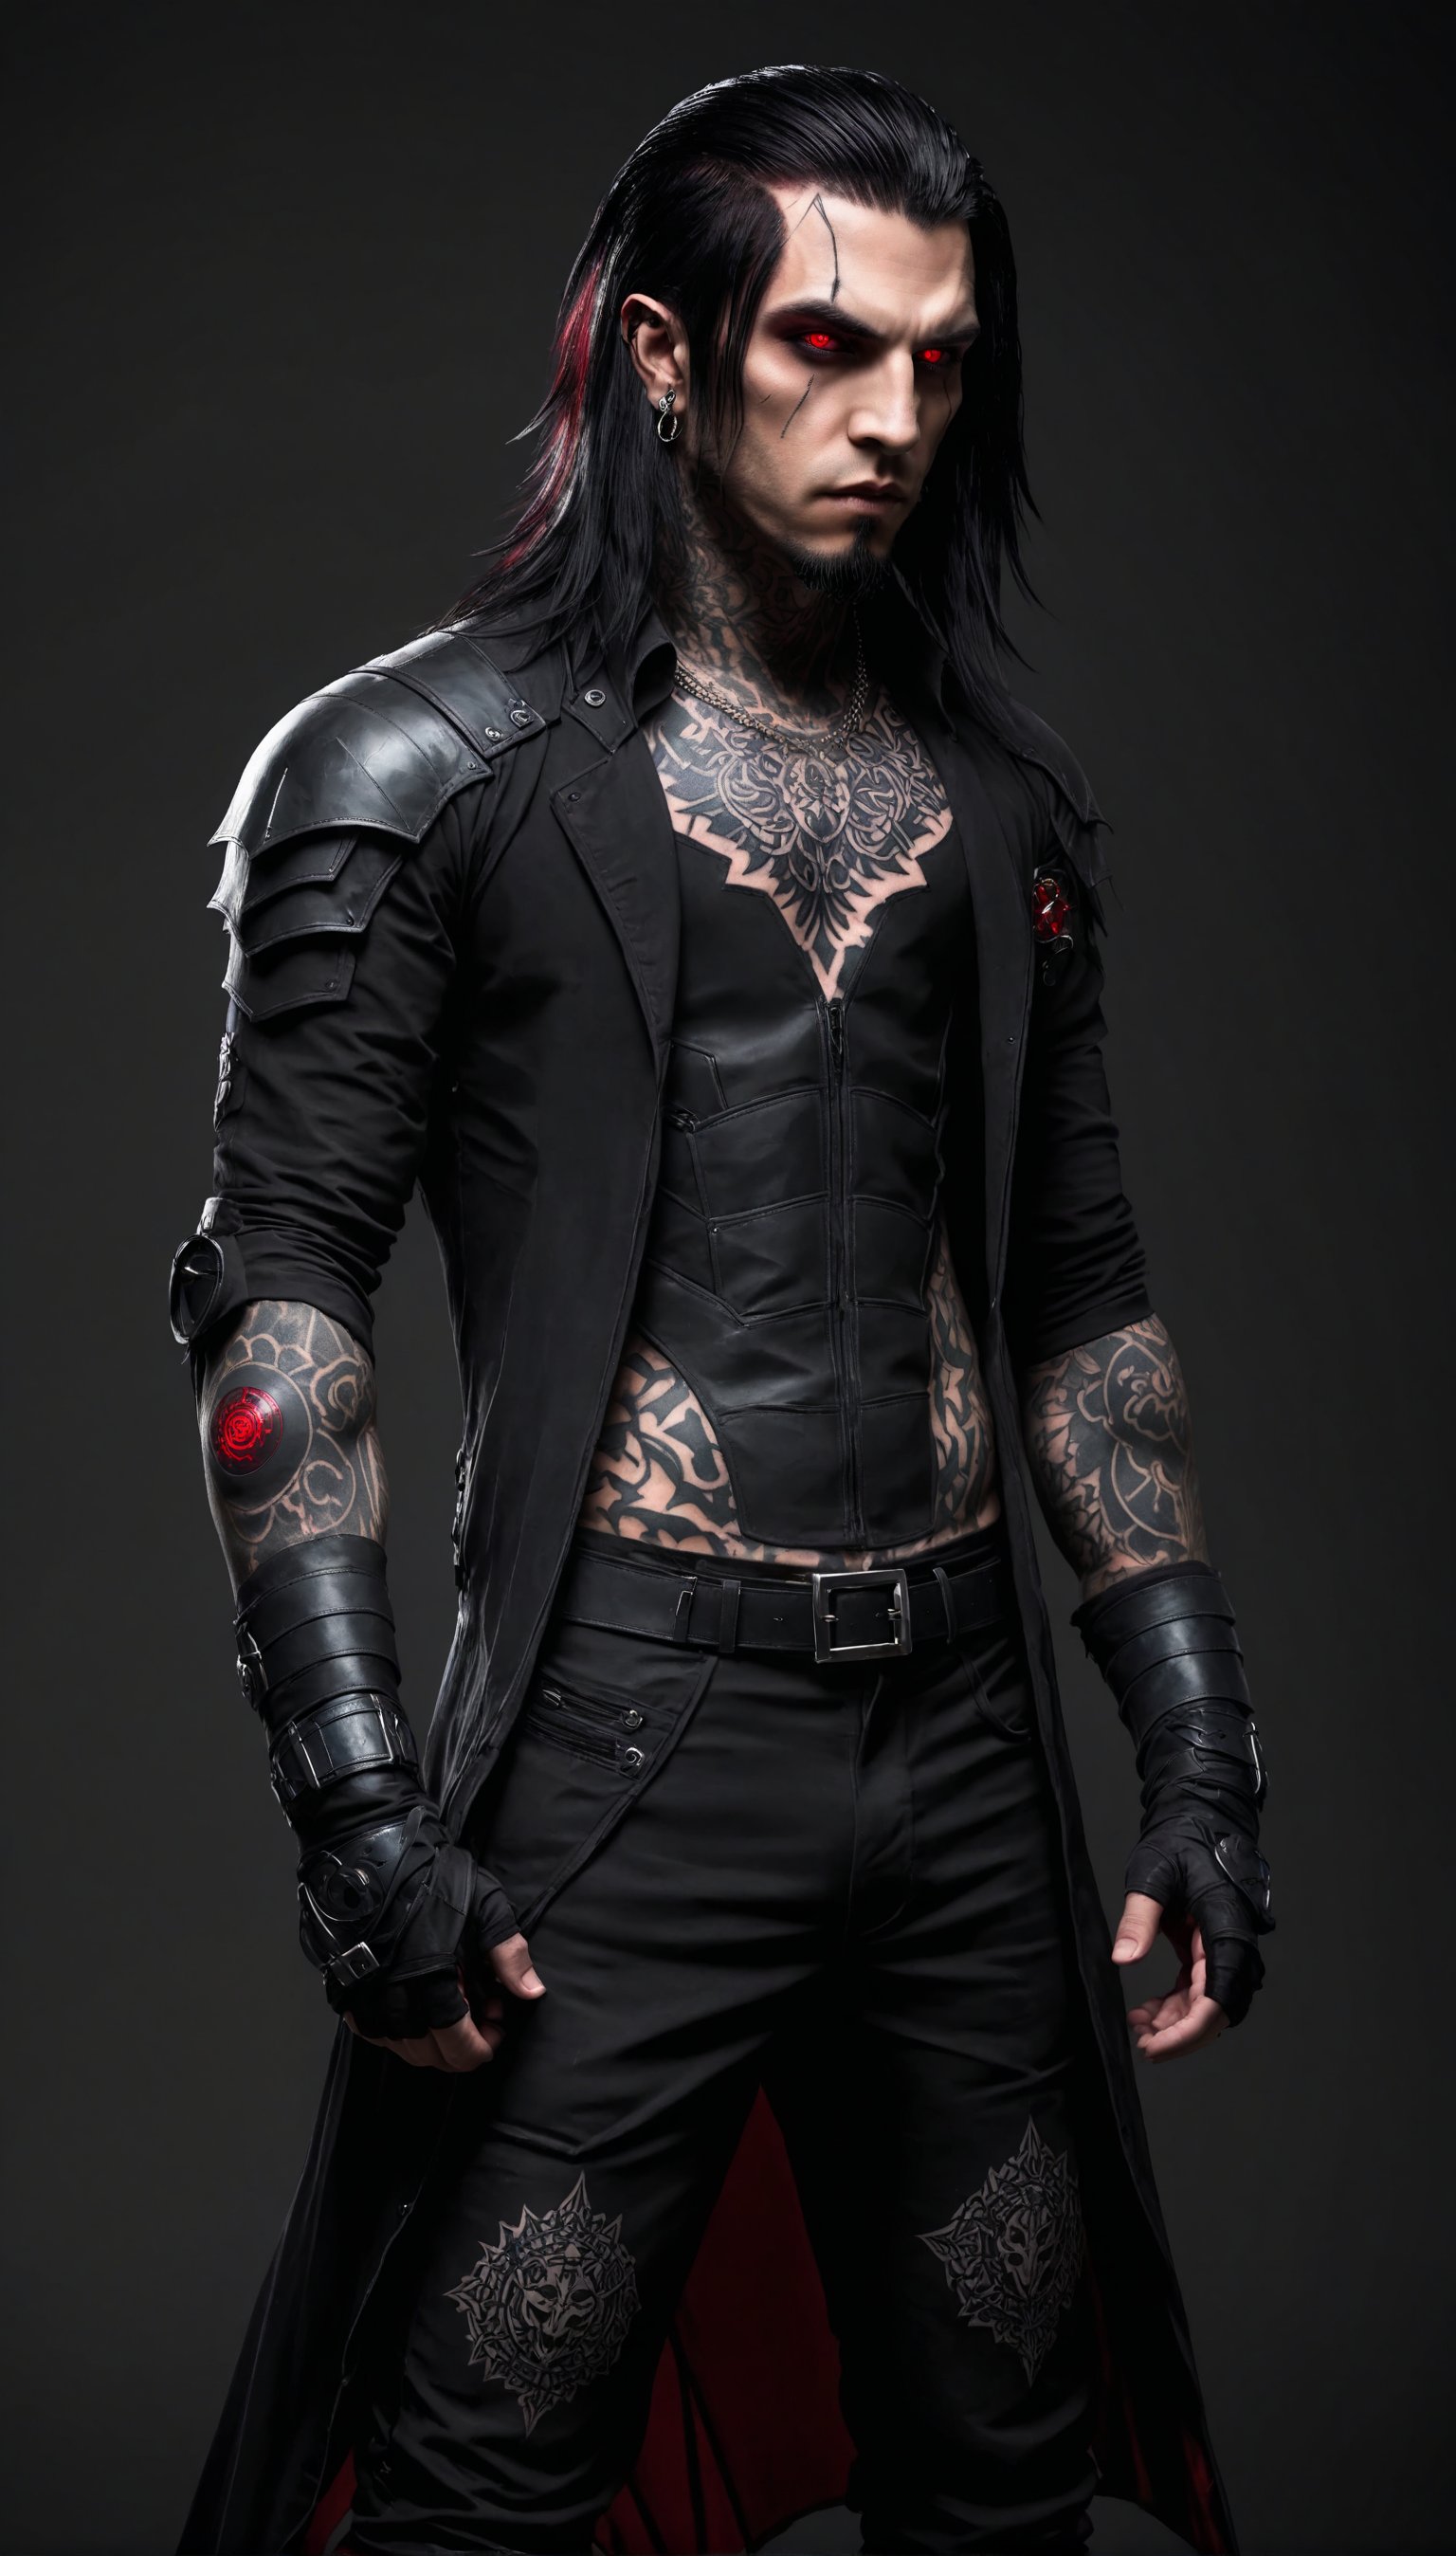 Antagonist Design,1 man,badass man,
Ronnie Radke,
long hair,((tattoo on forehead:1.2)),Full body,
A vampire with a beautiful and cool design, ominous red eyes, sickly fair skin, and sharp black armor.,zavy-cbrpn,Watch the World Burn,

